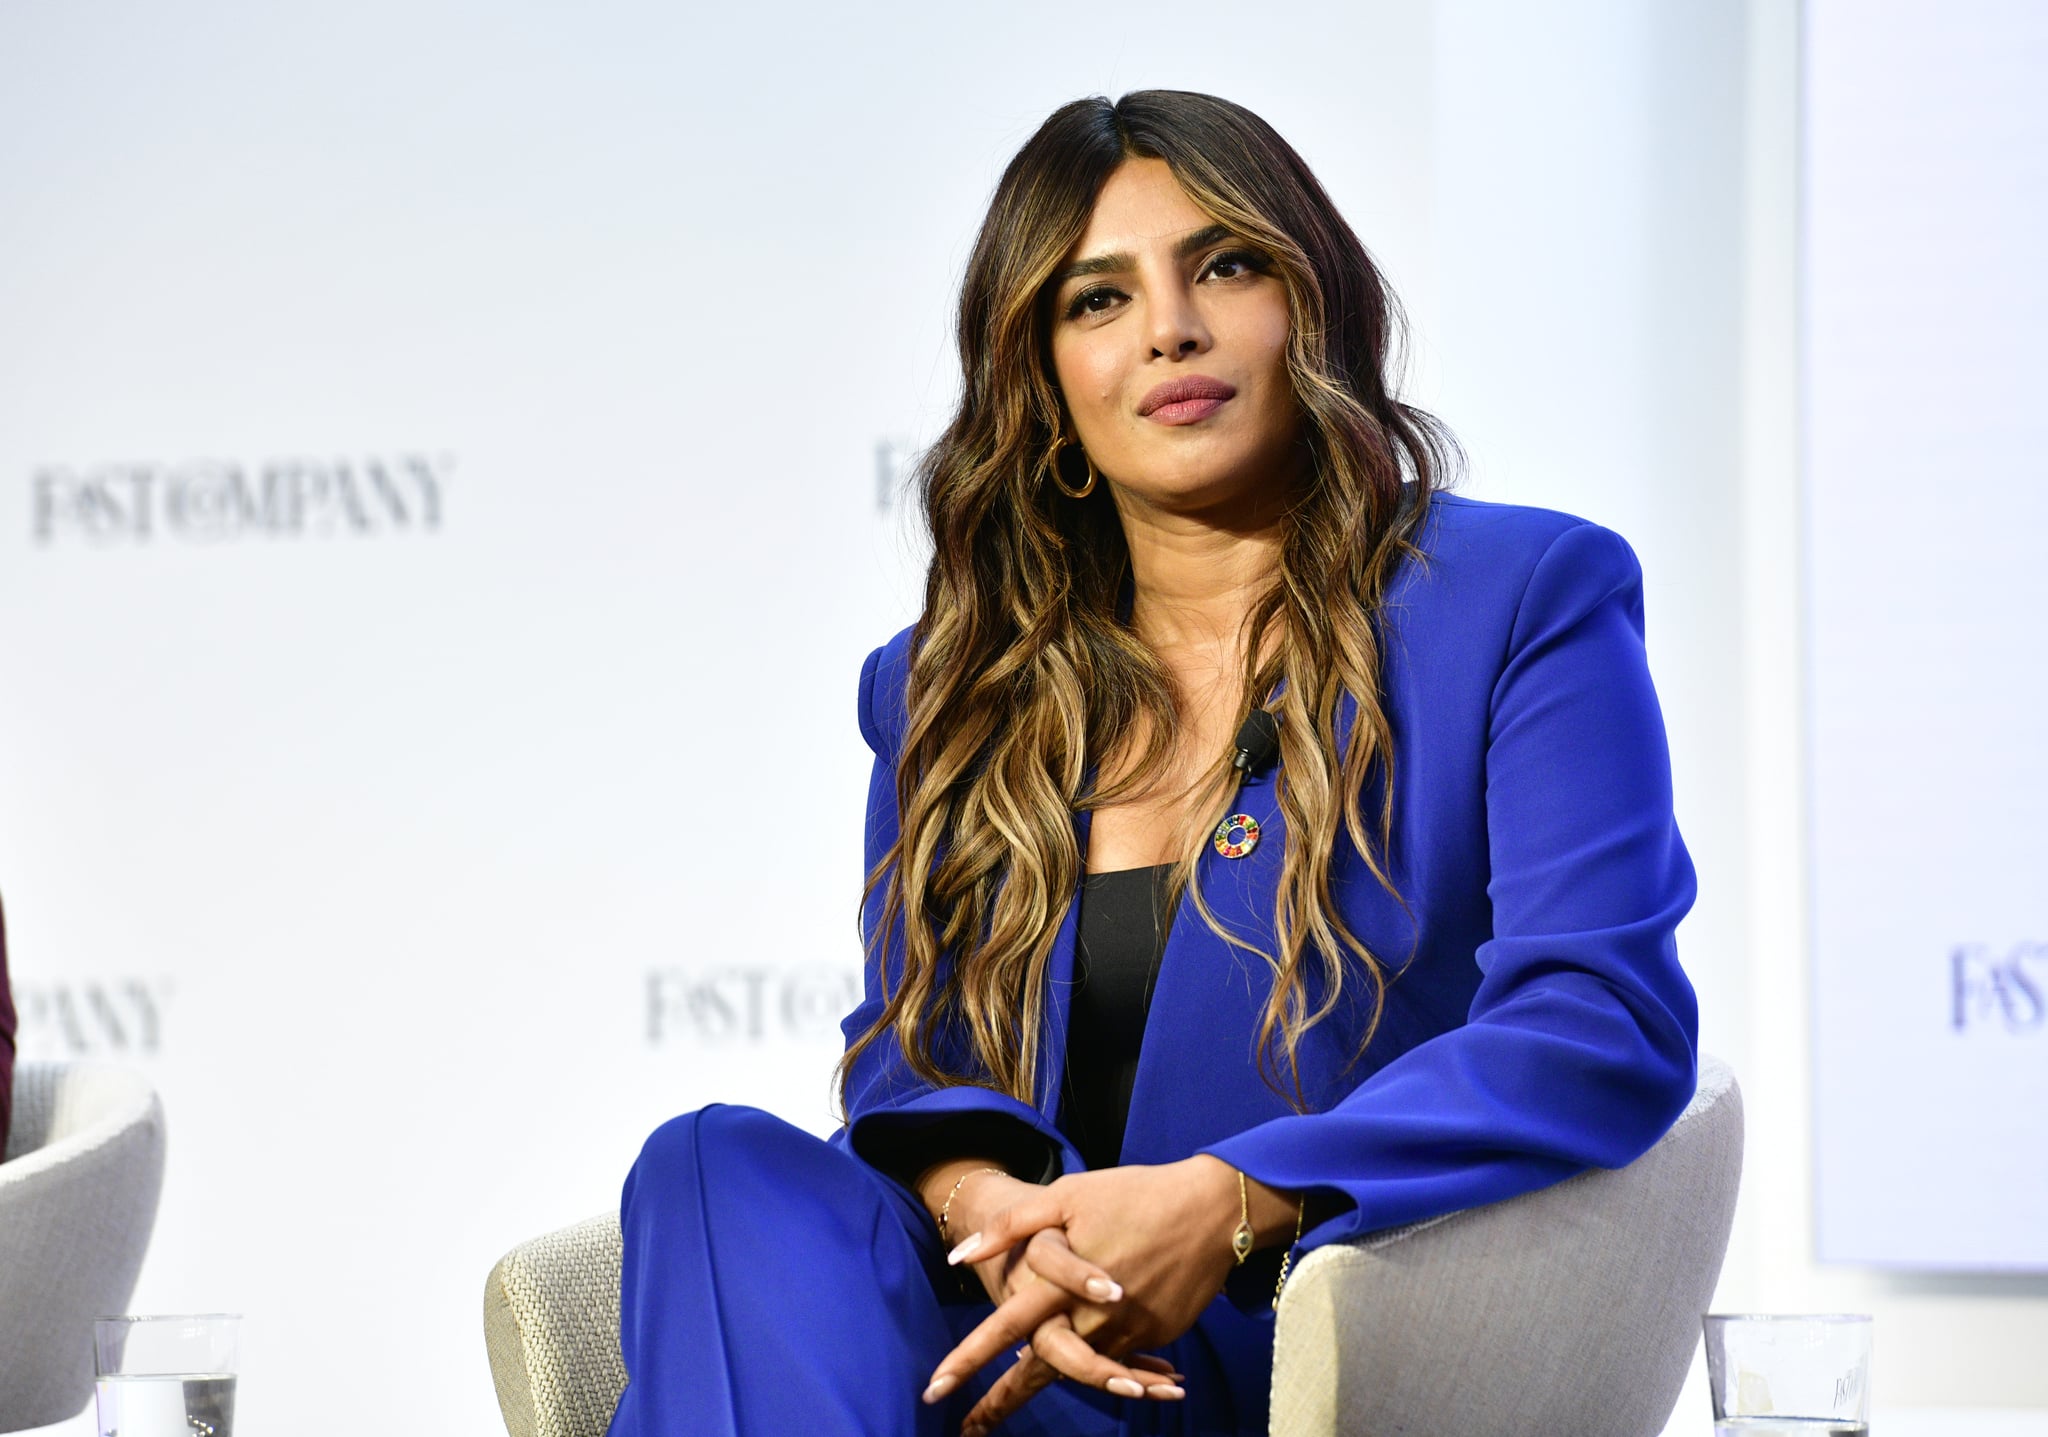 NEW YORK, NEW YORK - SEPTEMBER 22: Priyanka Chopra Jonas, Actor, Producer, Philanthropist, speaks onstage during The Fast Company Innovation Festival - Day 3 on September 22, 2022 in New York City. (Photo by Eugene Gologursky/Getty Images for Fast Company)